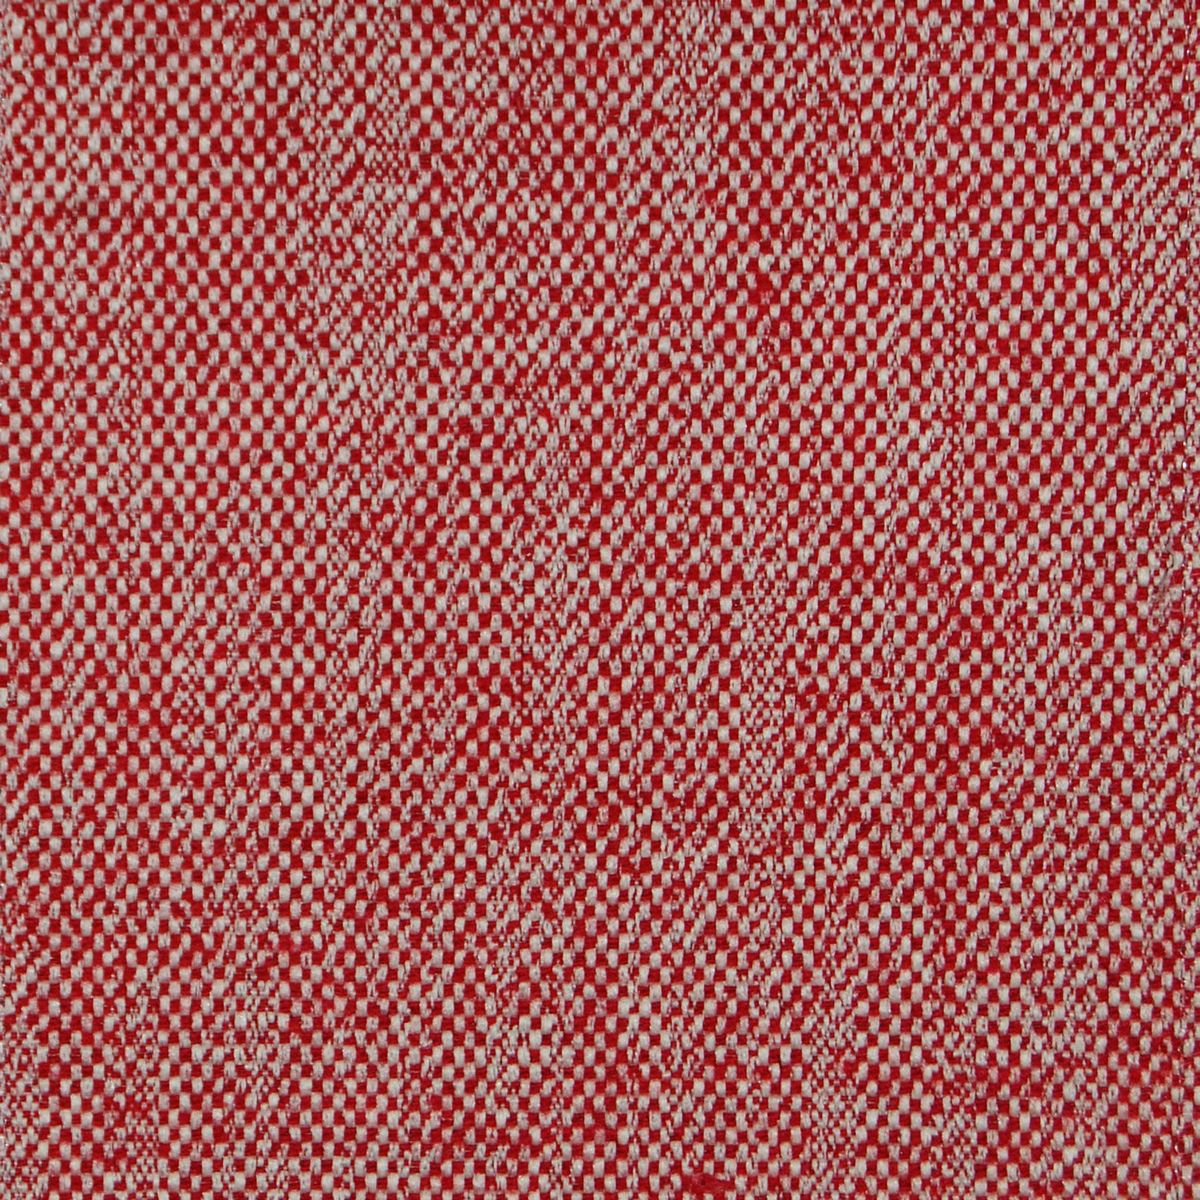 Selkirk Paprika Fabric by Voyage Maison